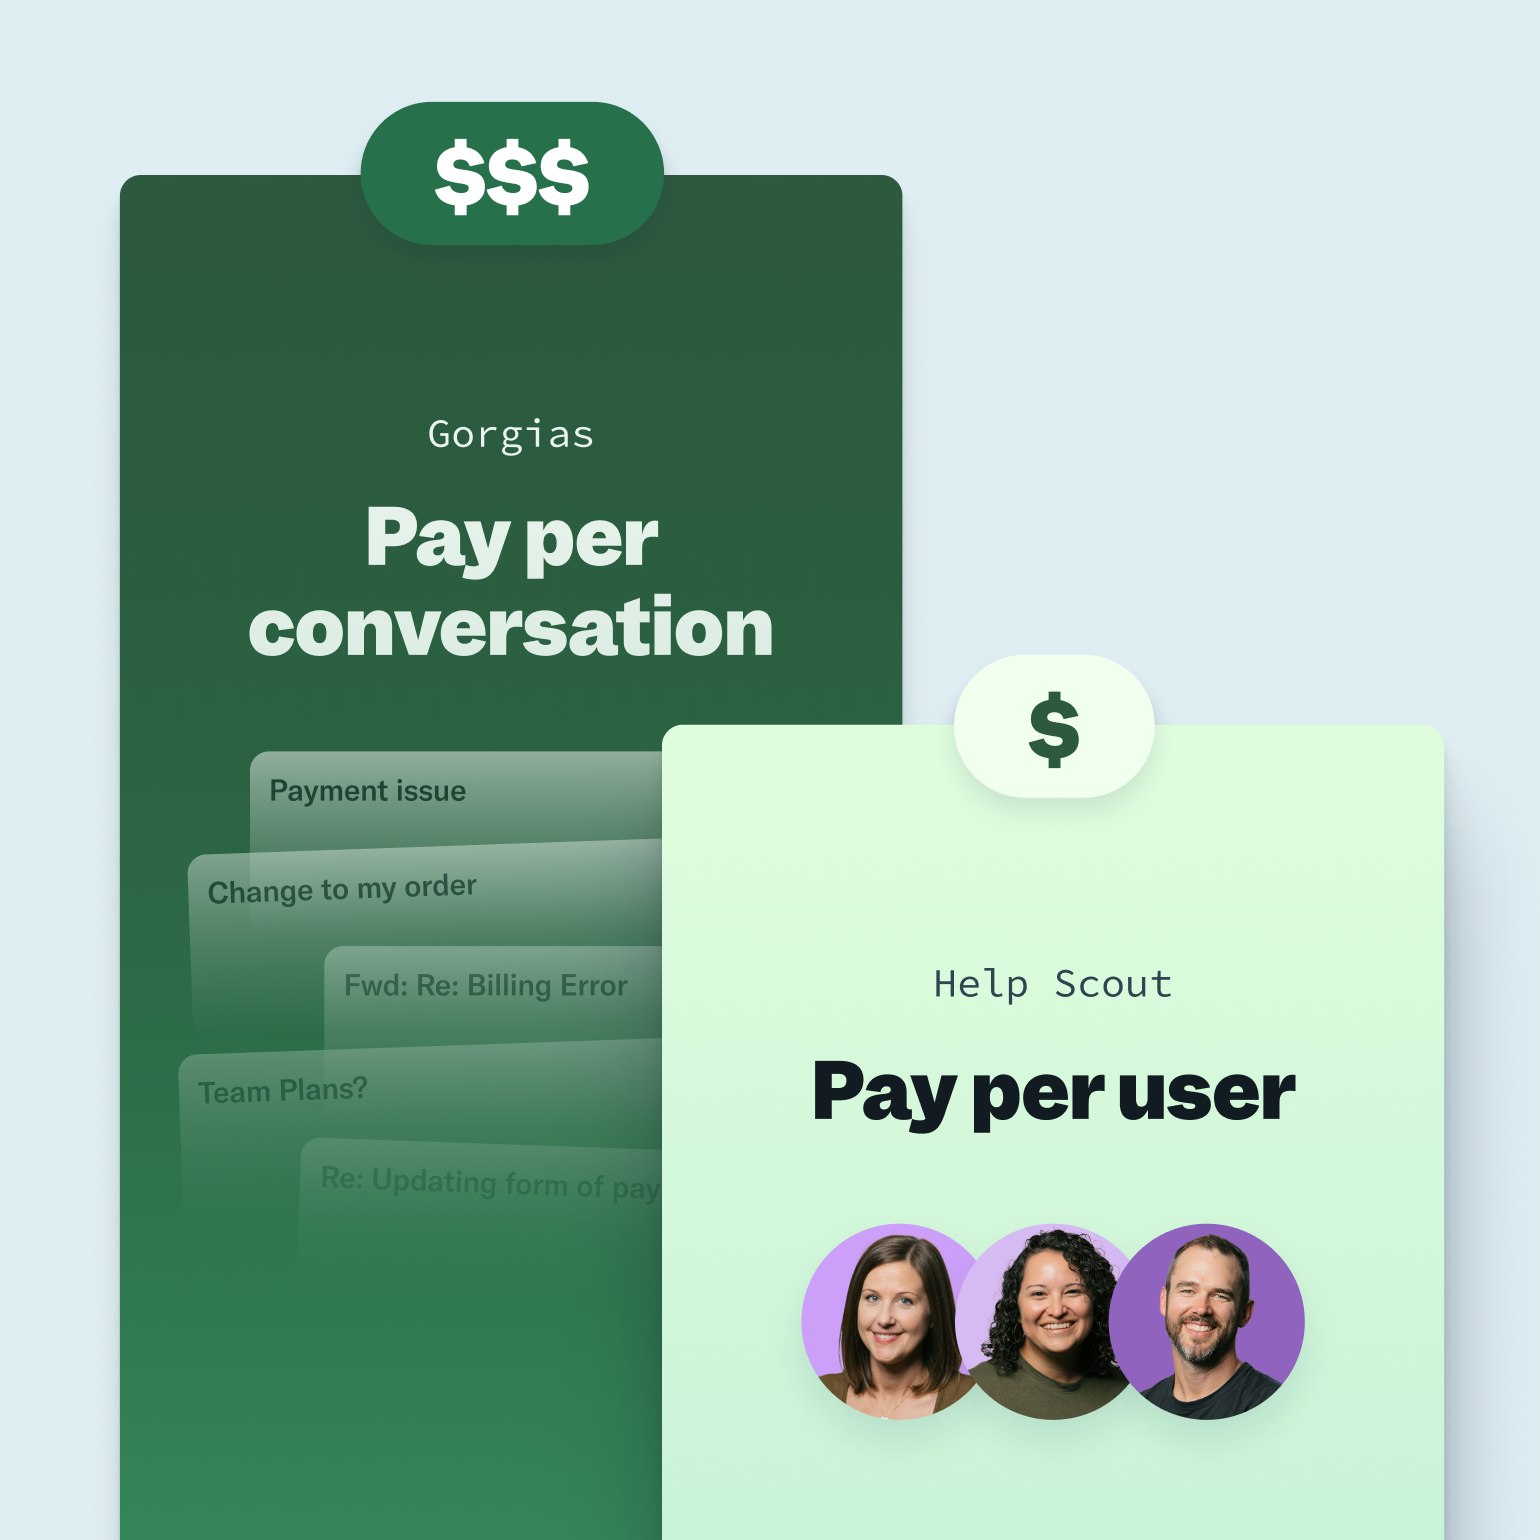 Clear, scalable pricing image - Gorgias compare